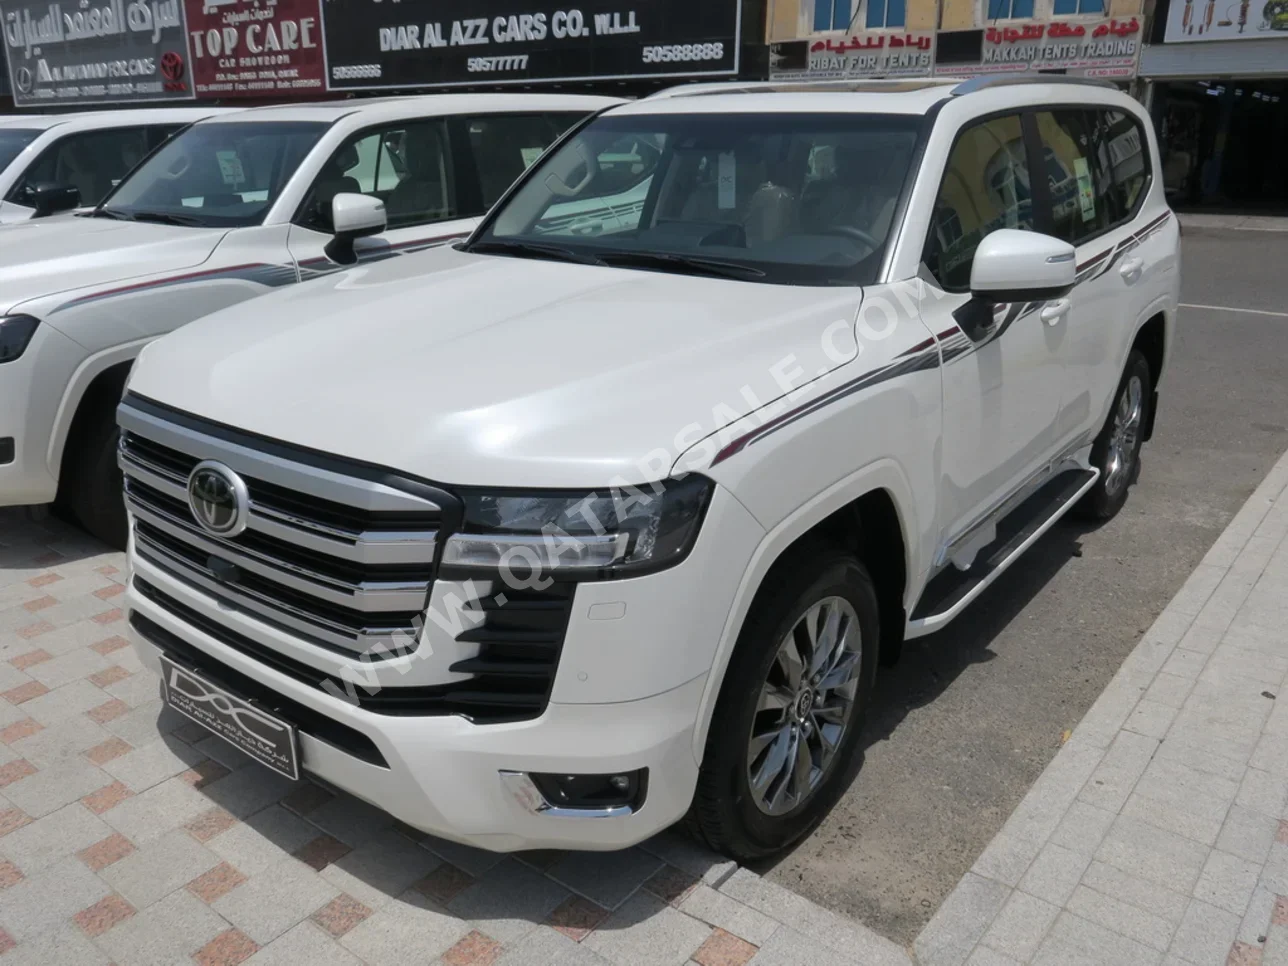 Toyota  Land Cruiser  GXR Twin Turbo  2024  Automatic  600 Km  6 Cylinder  Four Wheel Drive (4WD)  SUV  White  With Warranty